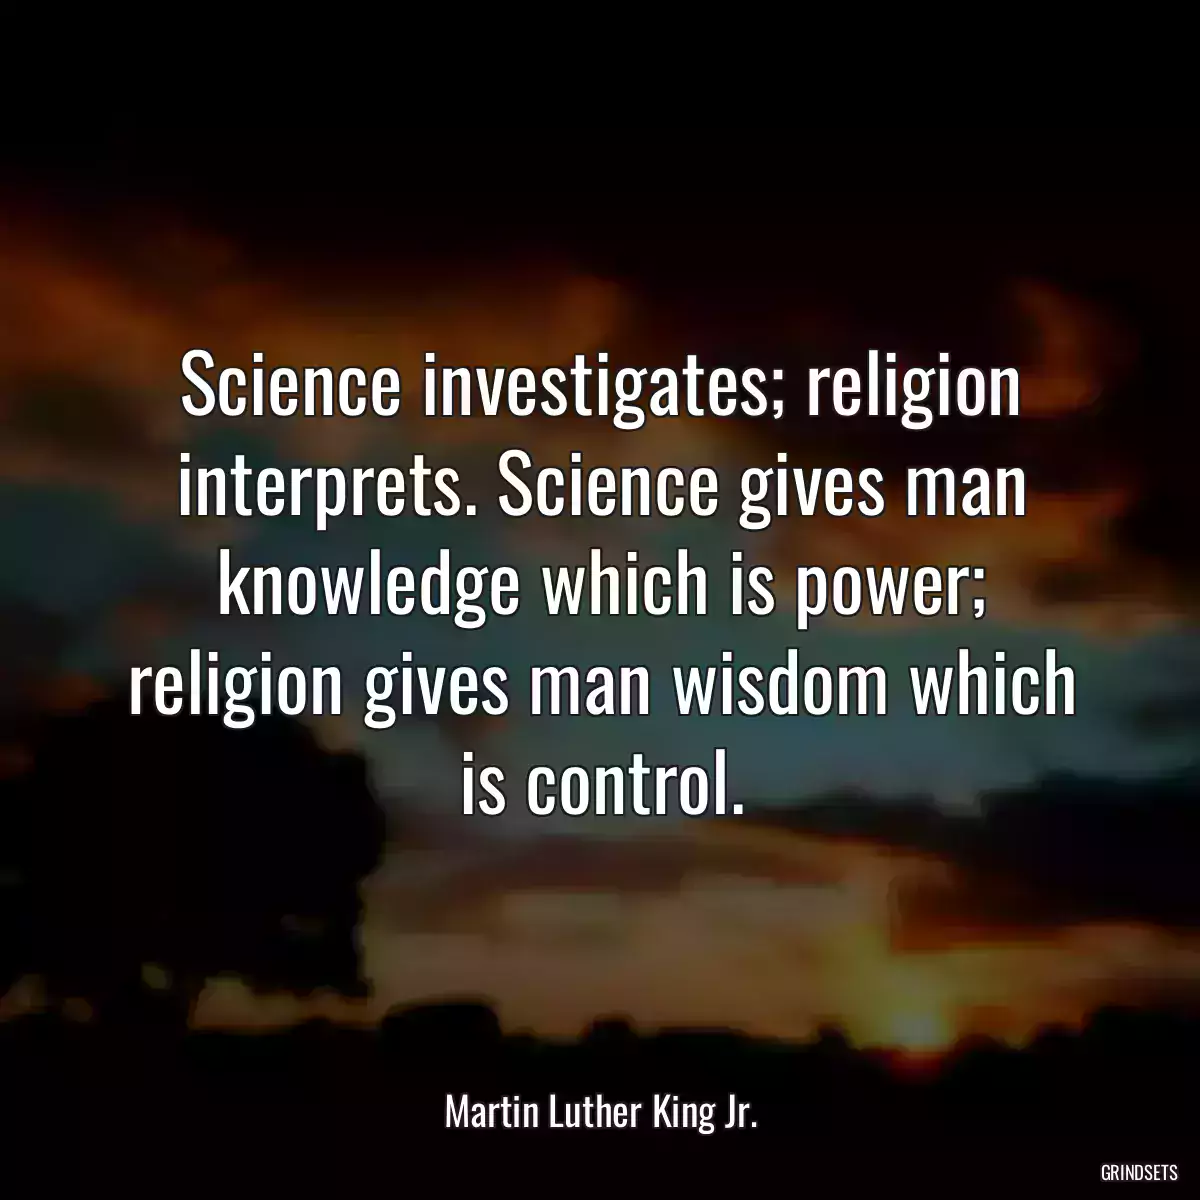 Science investigates; religion interprets. Science gives man knowledge which is power; religion gives man wisdom which is control.